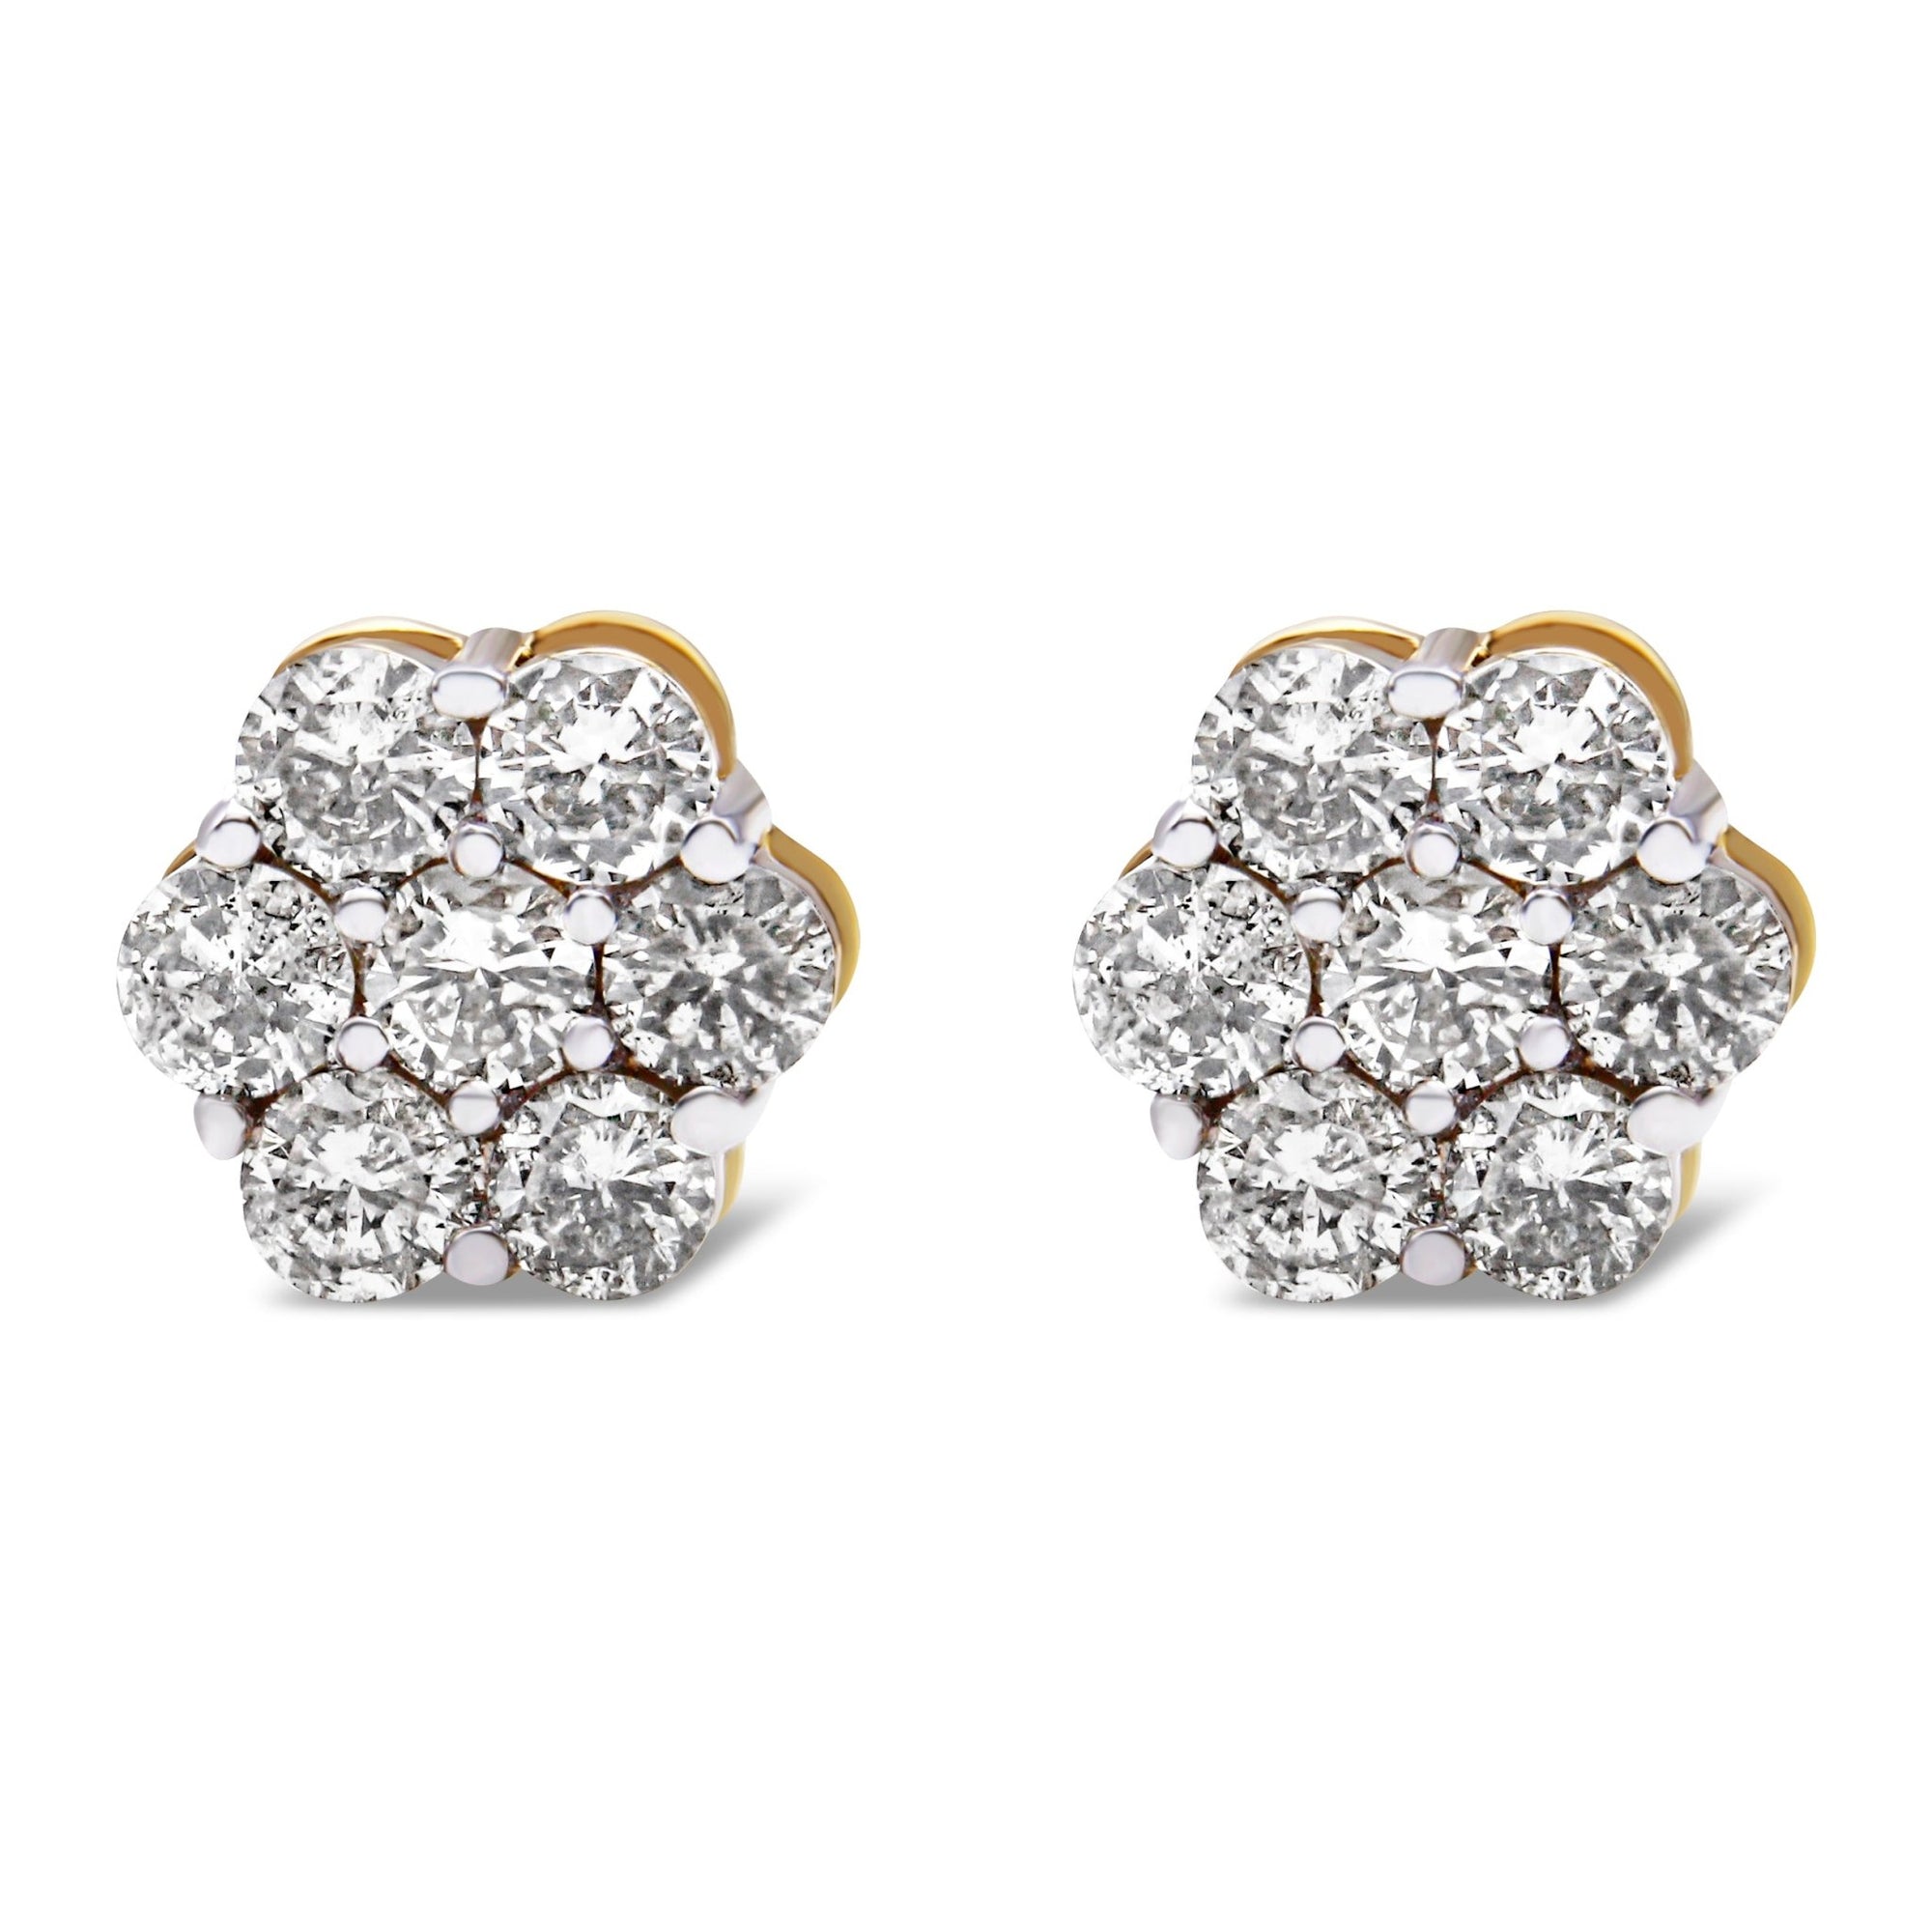 10K Yellow Gold Plated .925 Sterling Silver 2.0 Cttw Diamond Floral Cluster Stud Earrings (J-K Color, I1-I2 Clarity) - LinkagejewelrydesignLinkagejewelrydesign